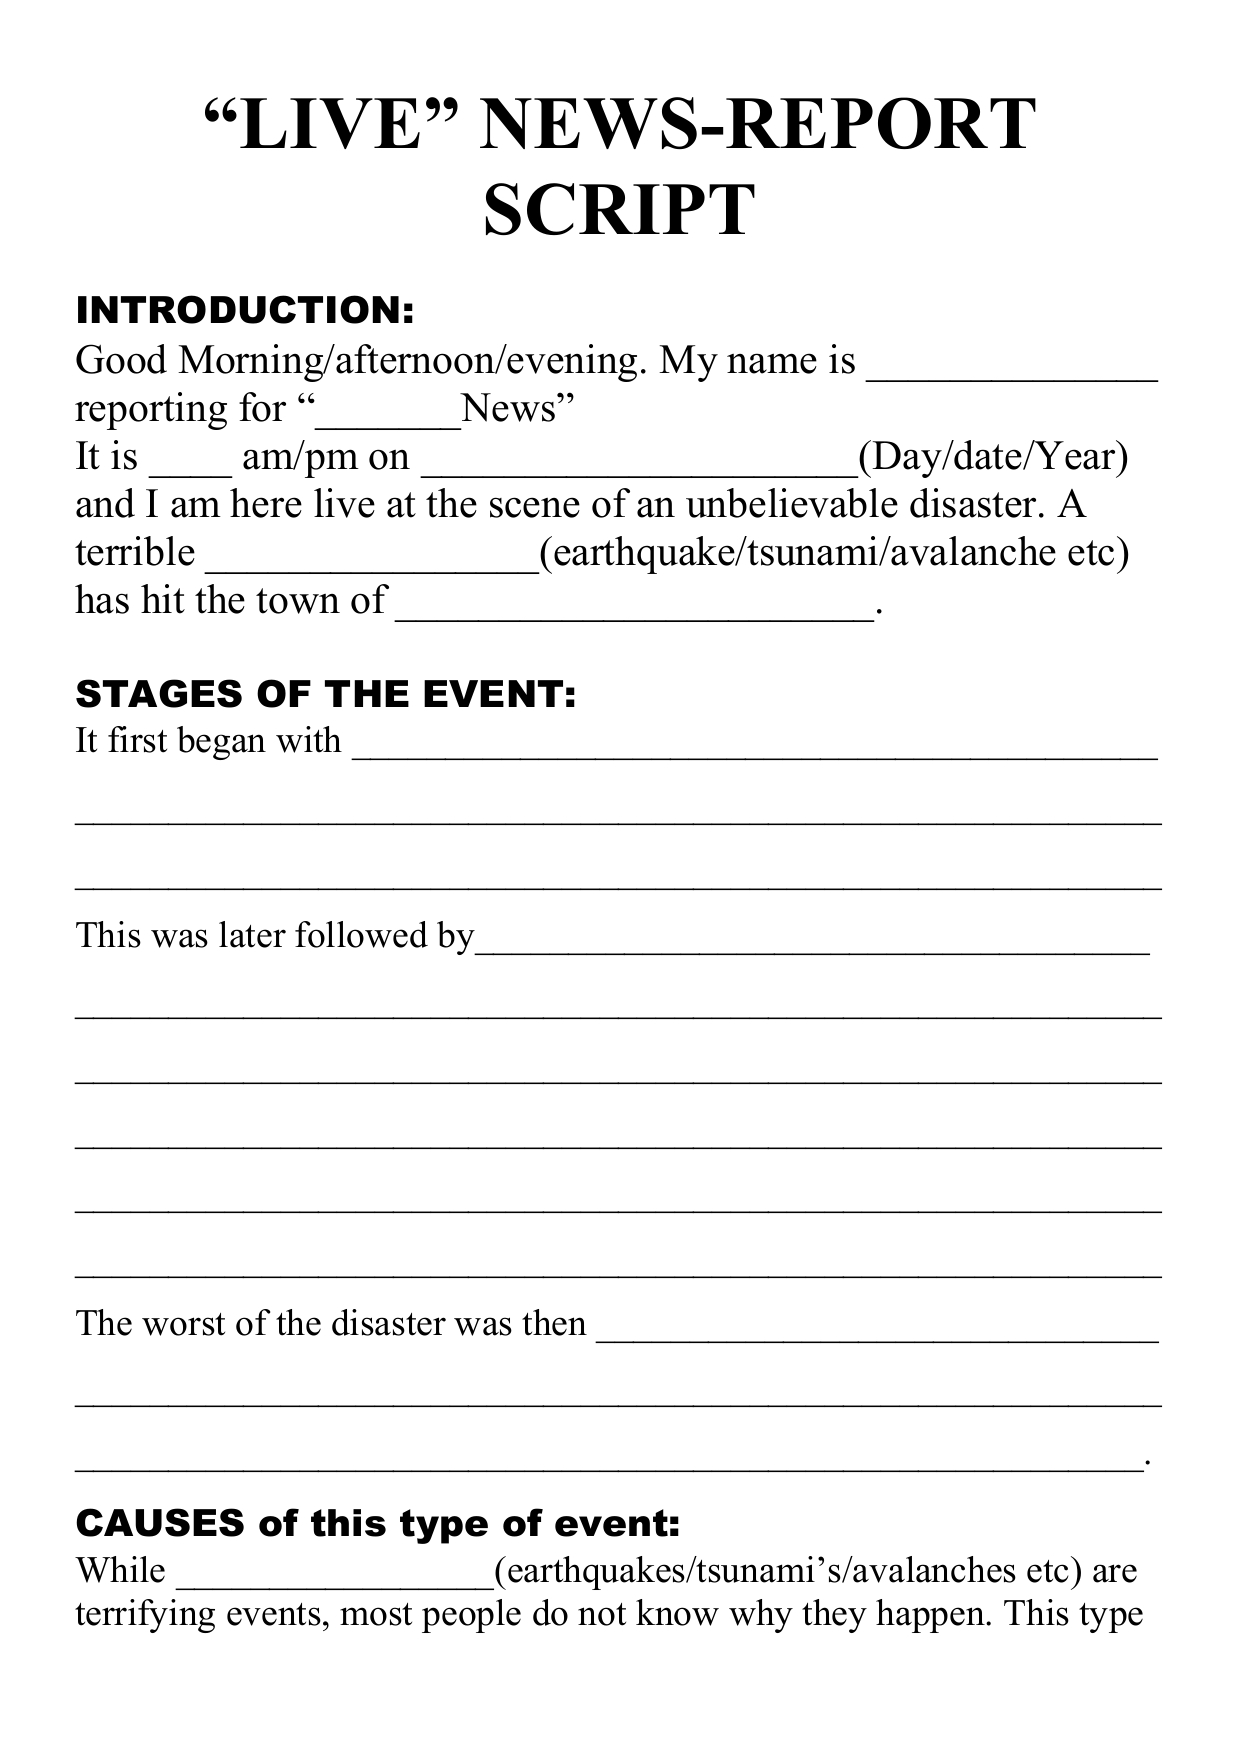 Natural Disaster - Live Newsreport Script Template In News Report Template